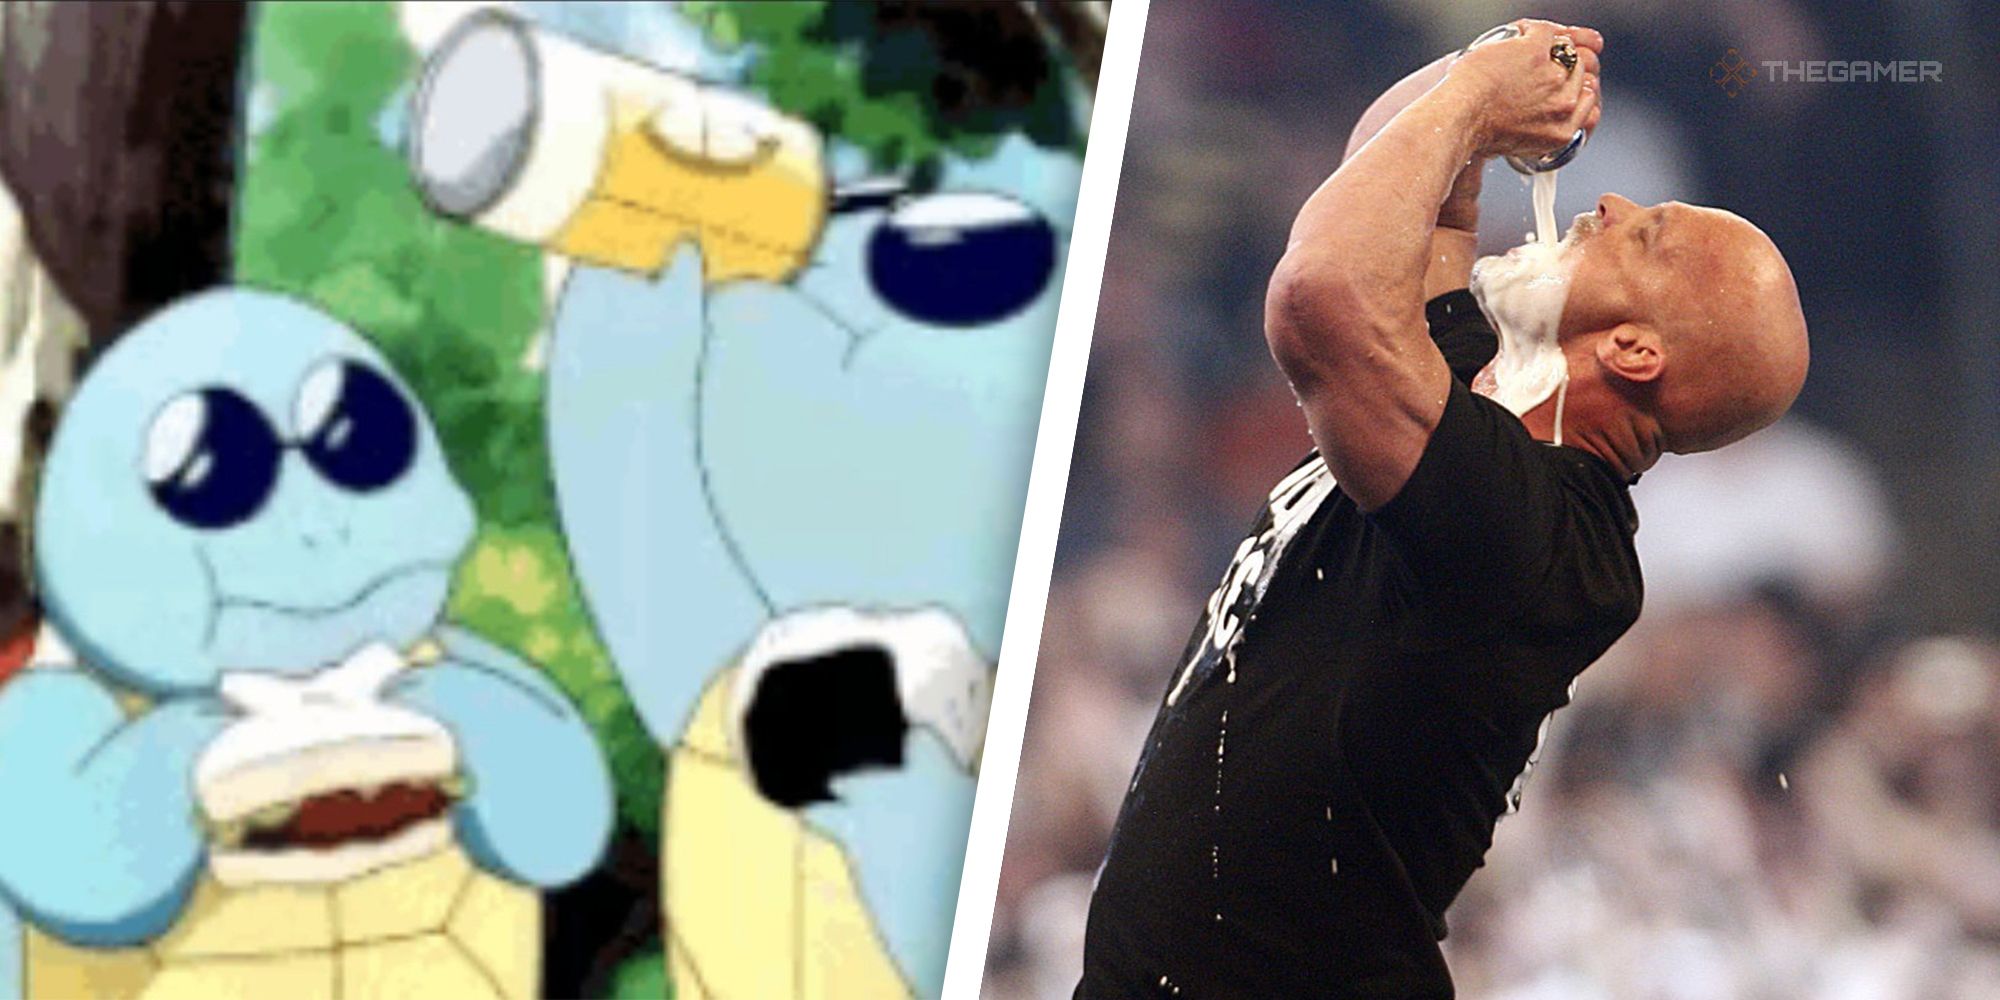 Heres 30 Wrestlers As Pokemon For The Royal Rumble (25)